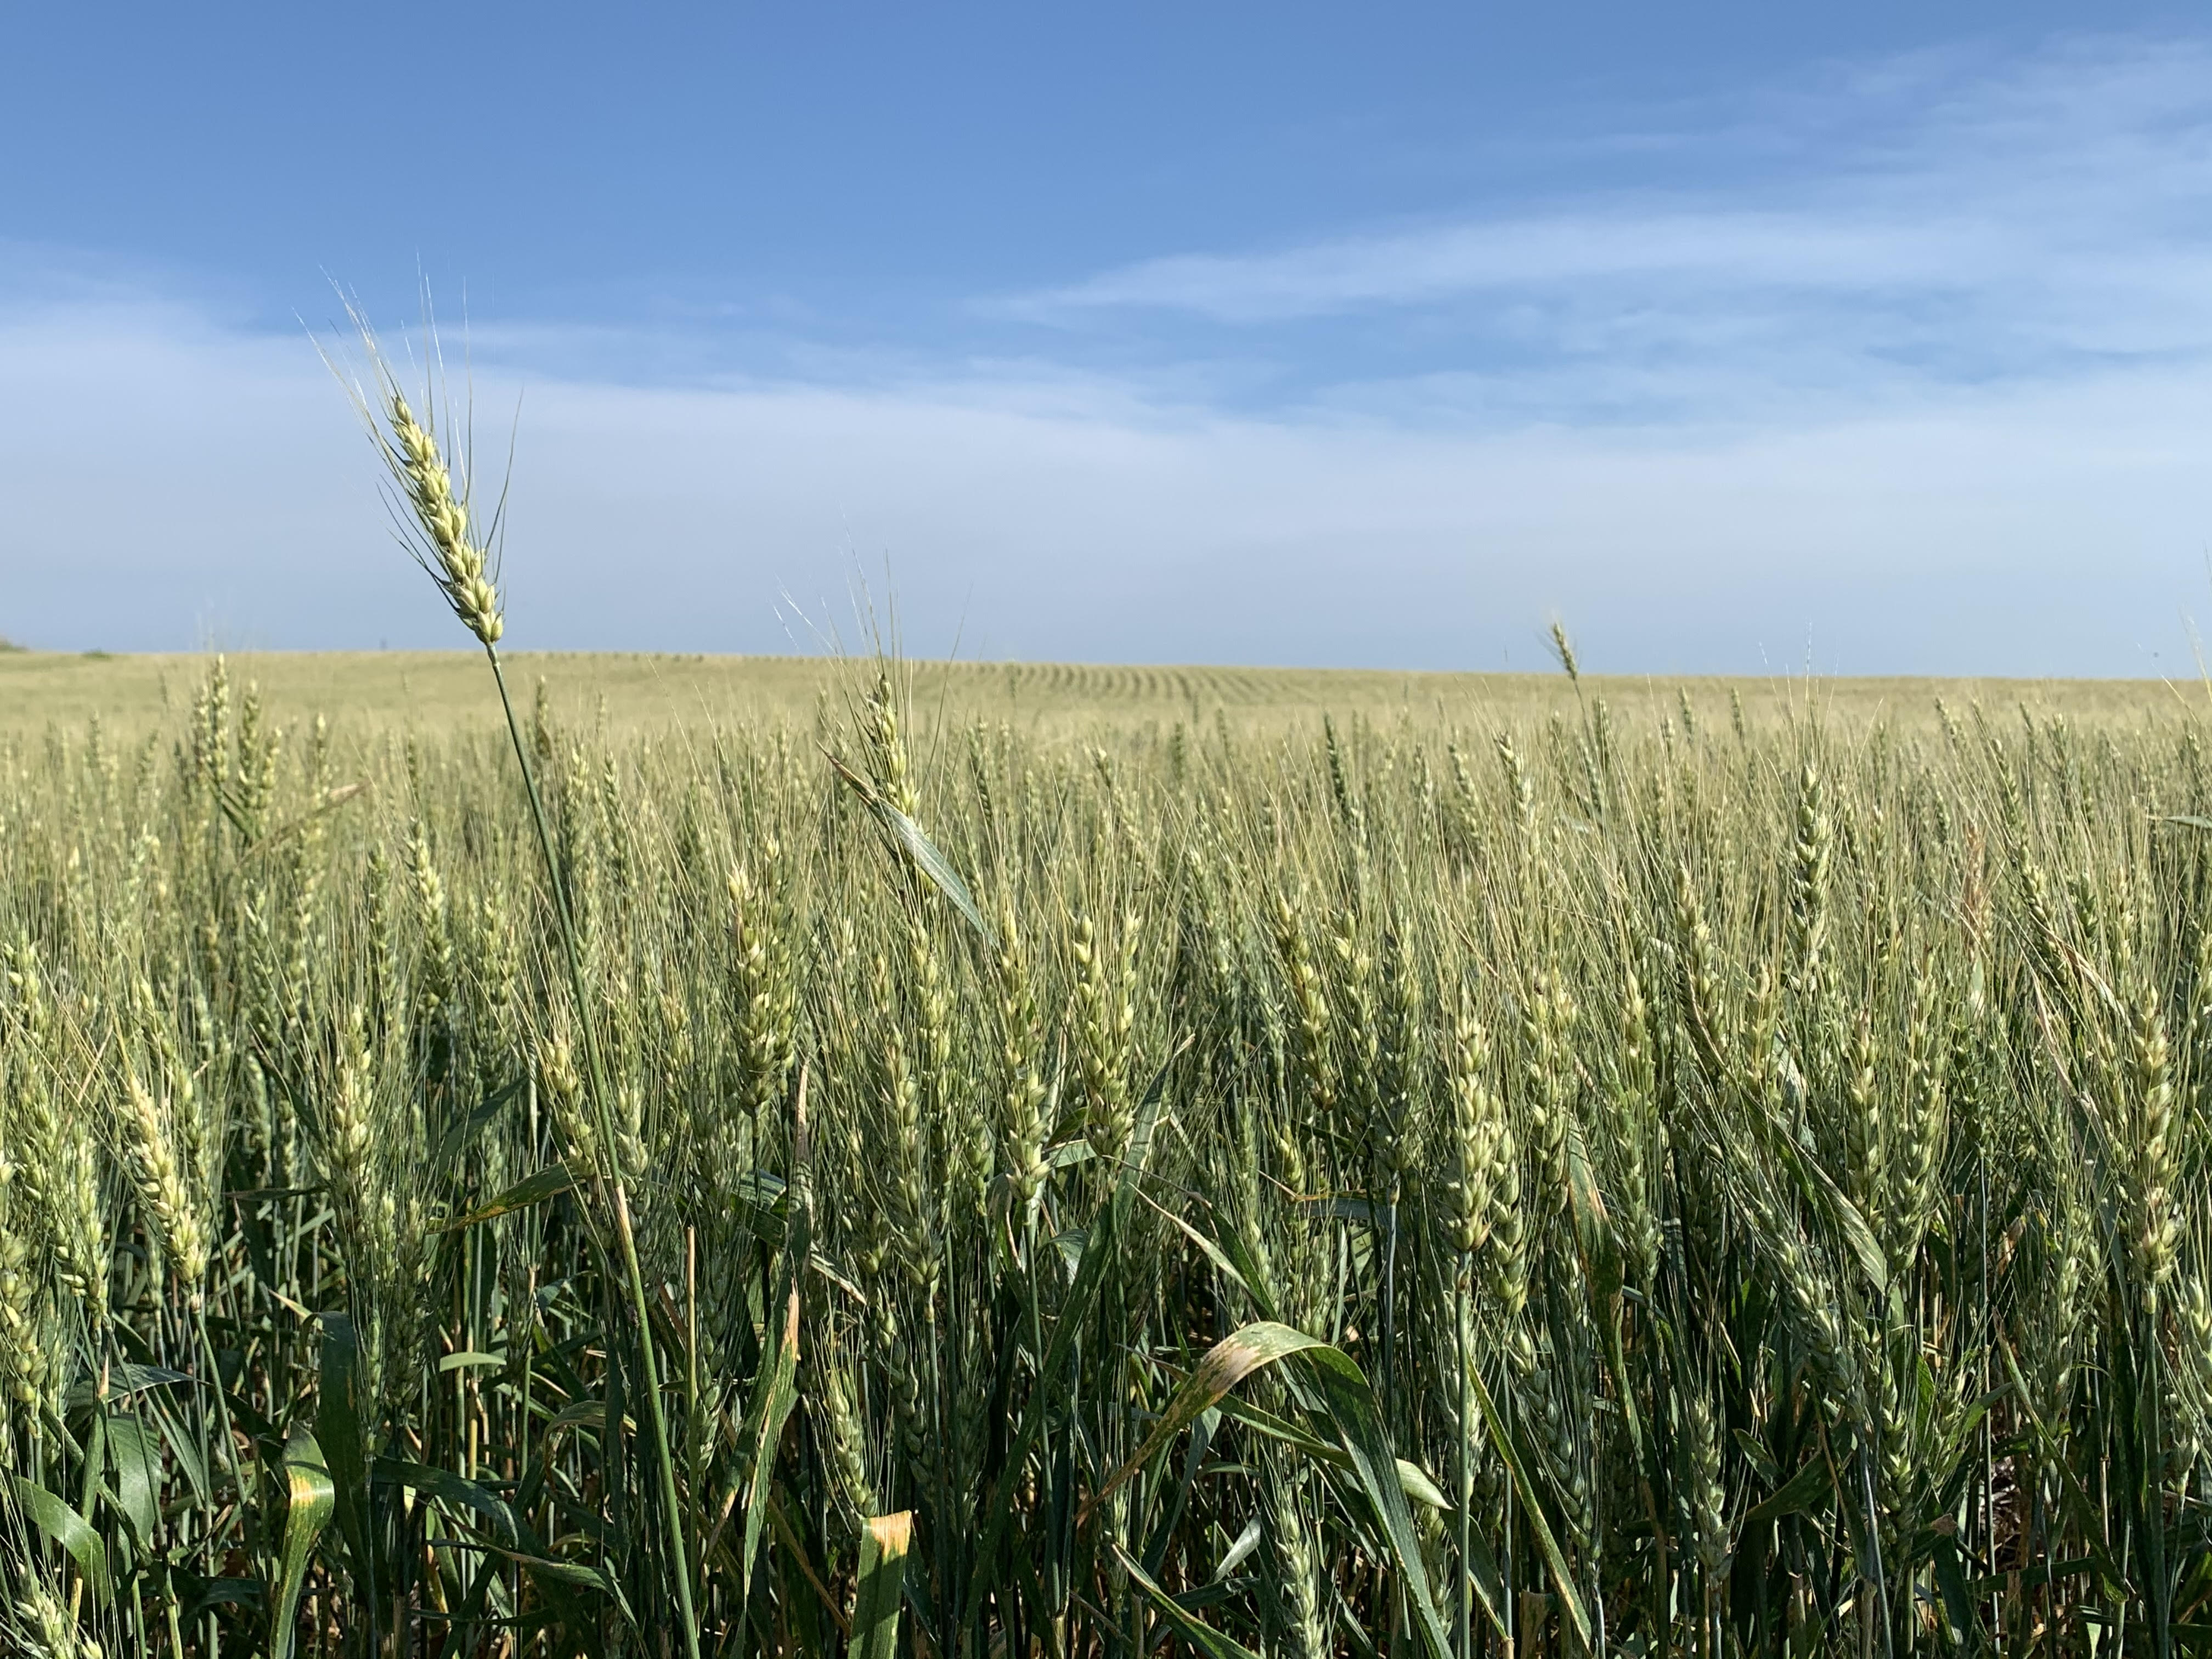 Mid-morning Ag News, February 28, 2022: The value of field crops in Minnesota and North Dakota up from 2020